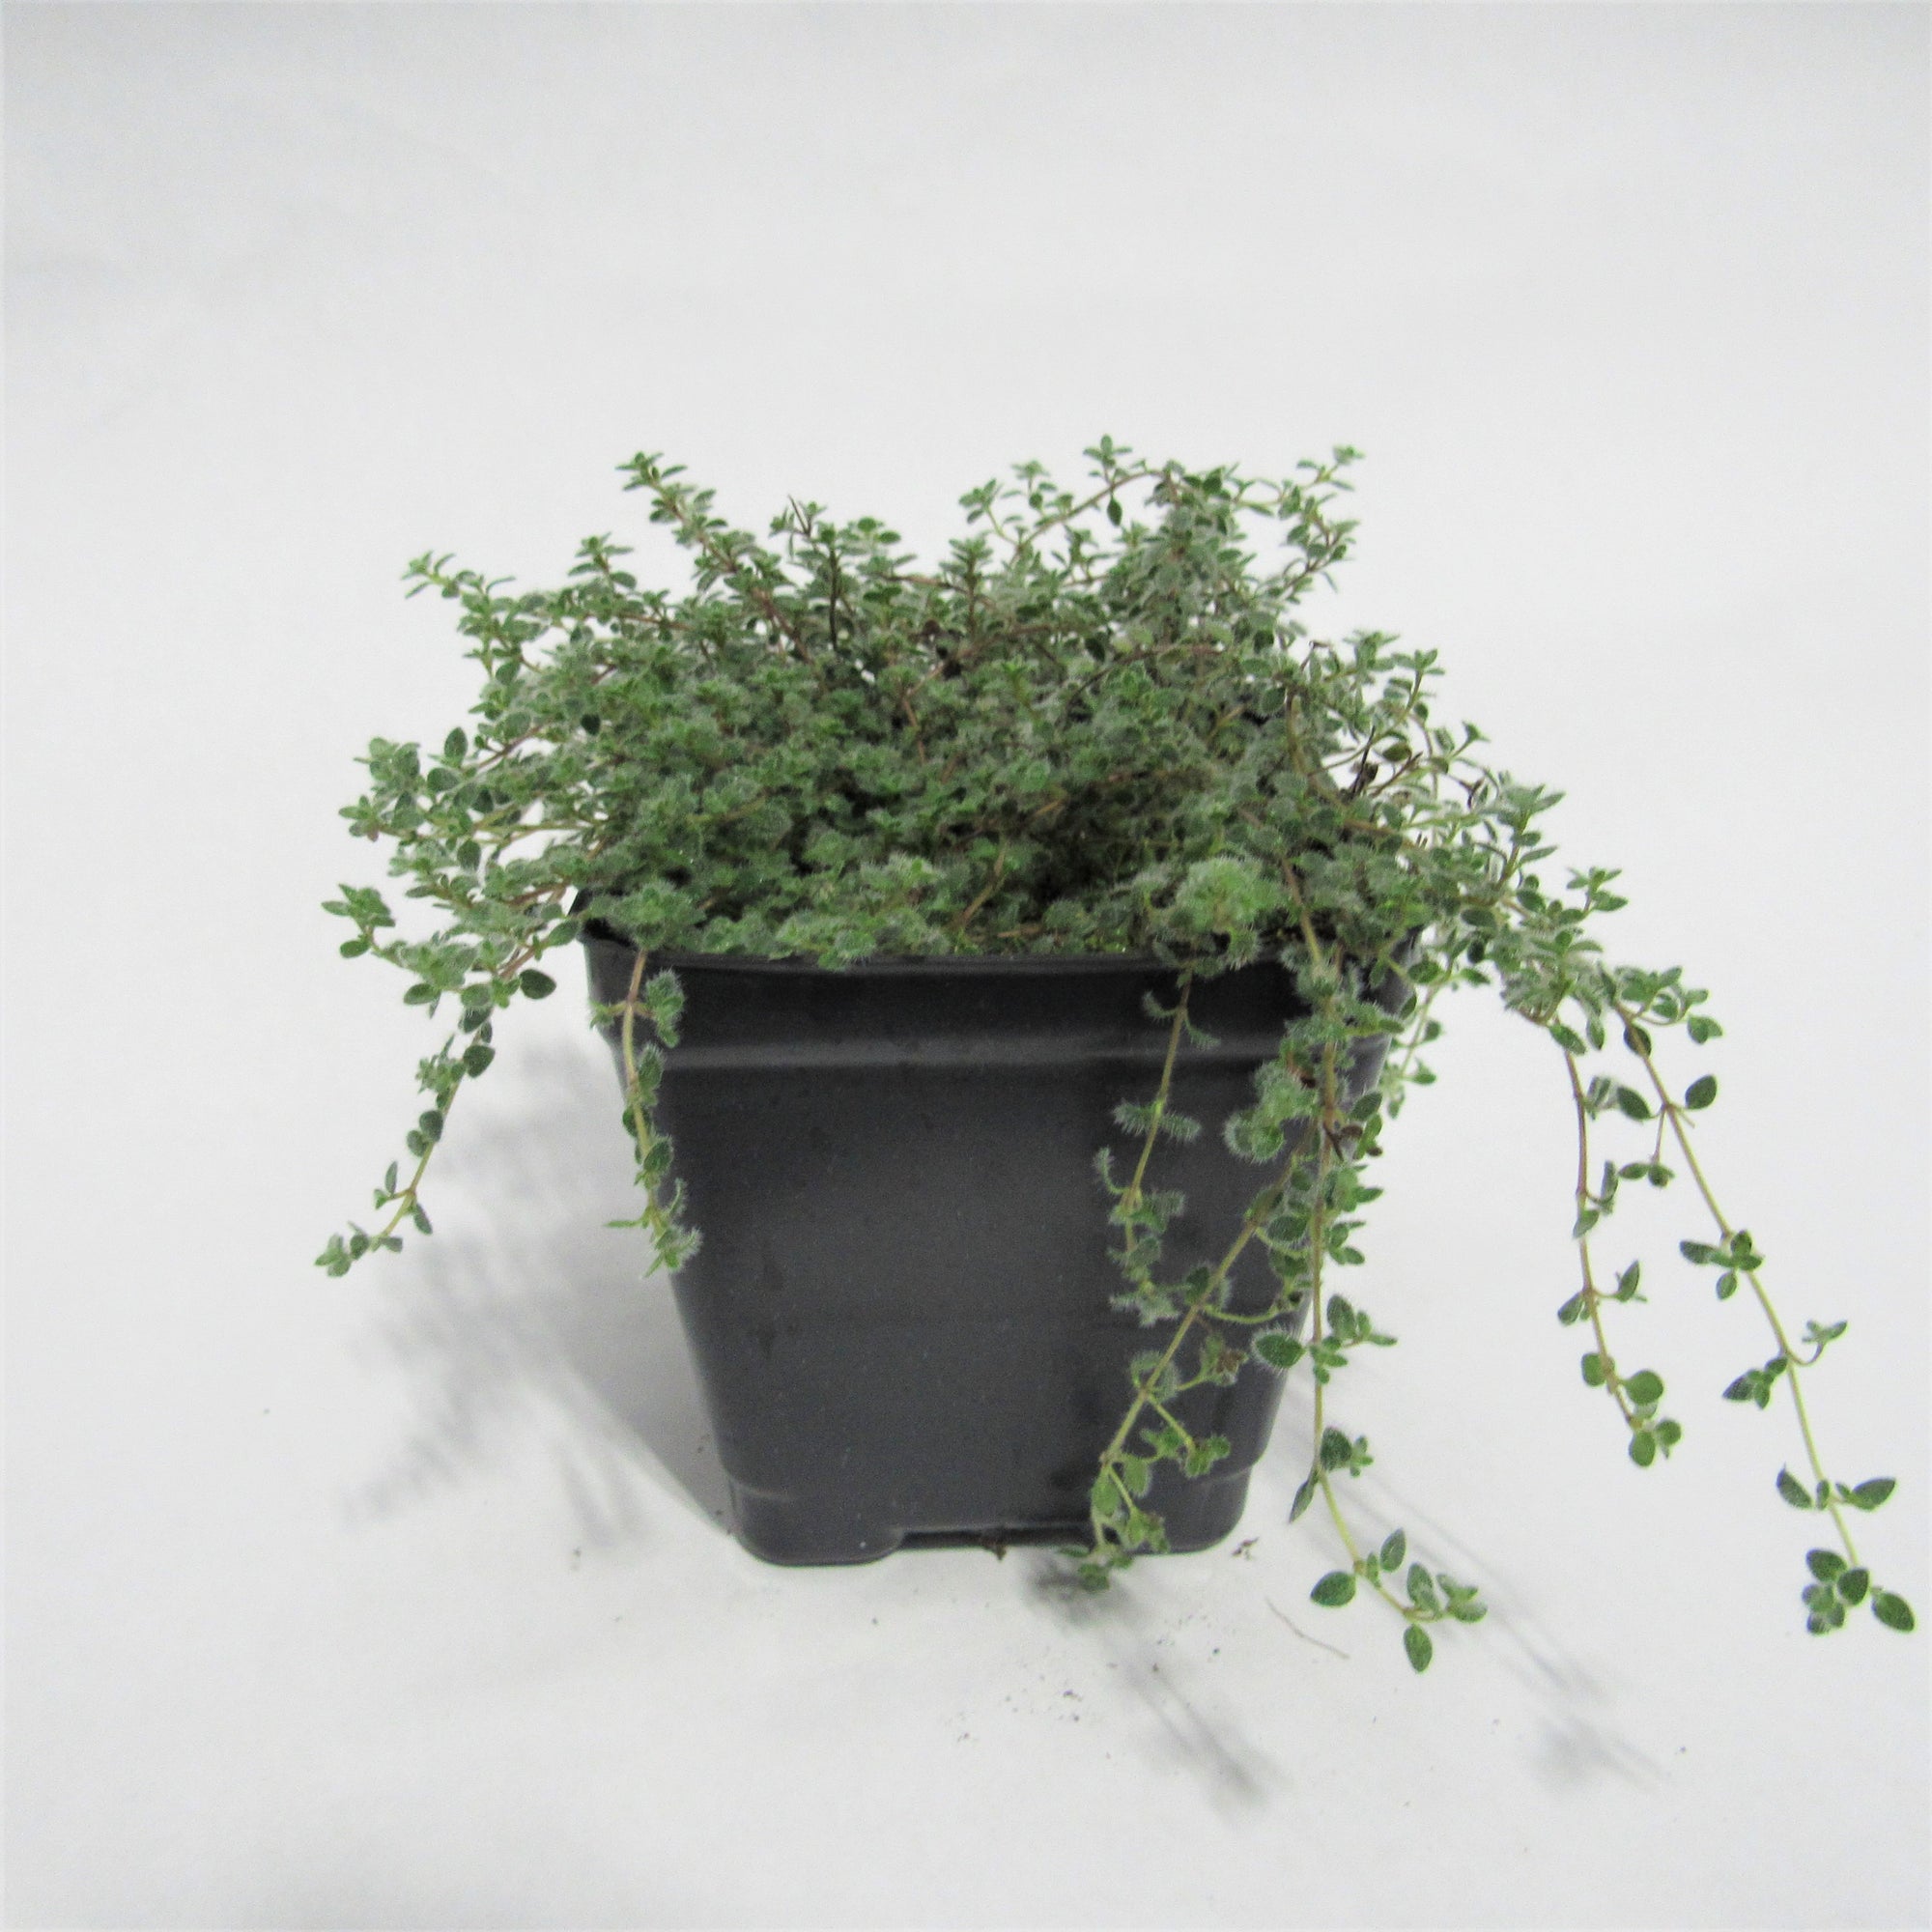 Thyme 'Woolly'